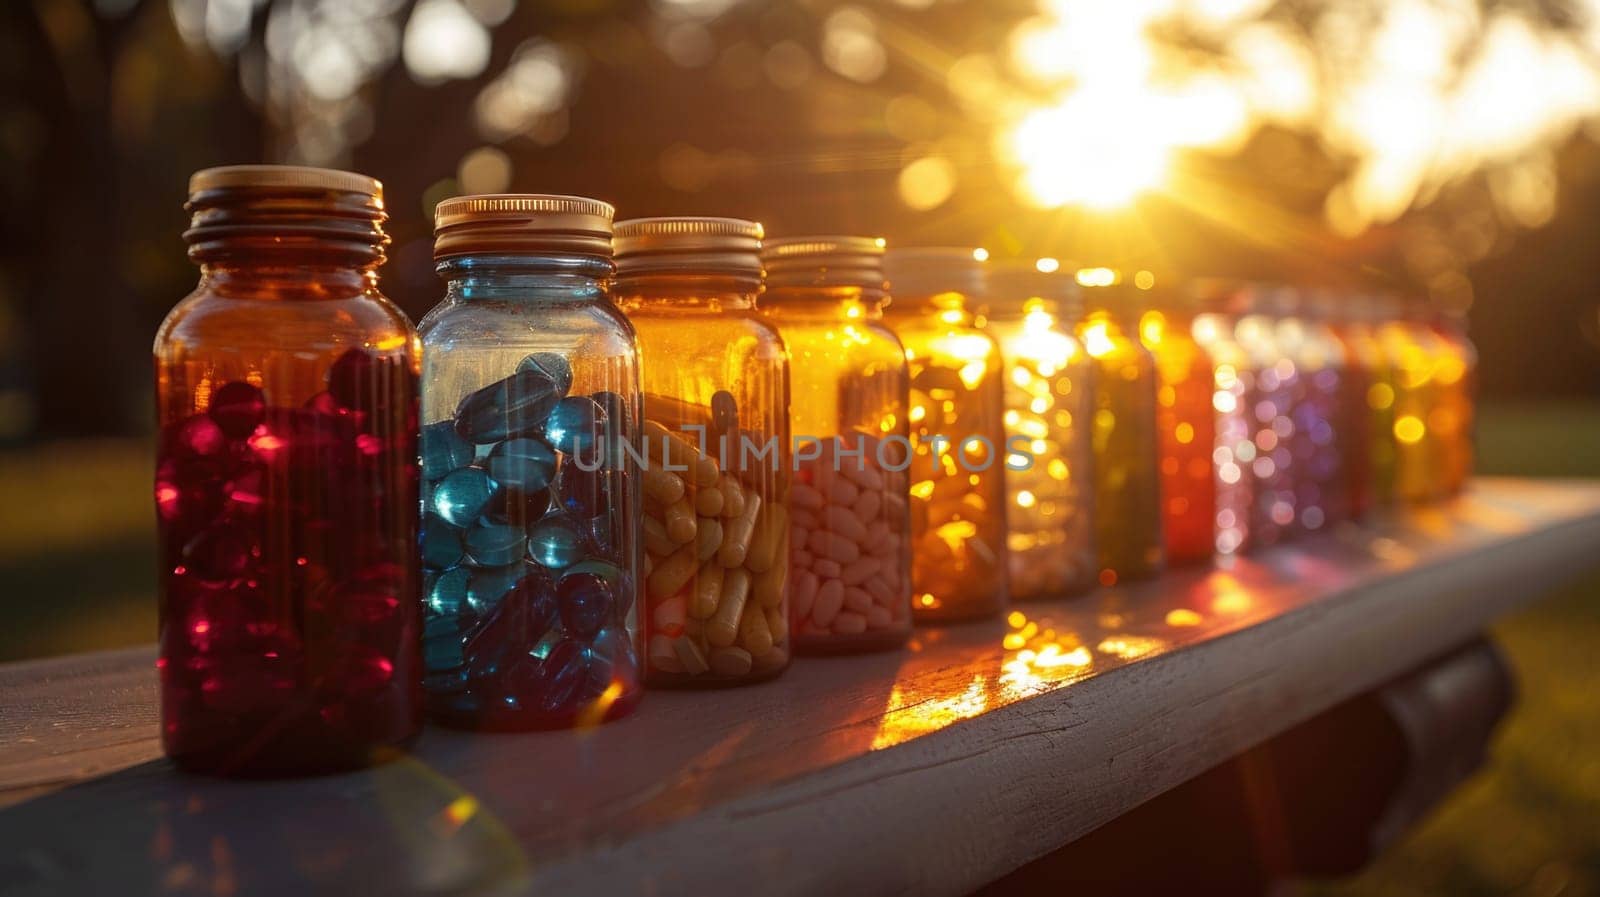 A collection of jars filled with various types of colorful beads neatly arranged in a row.